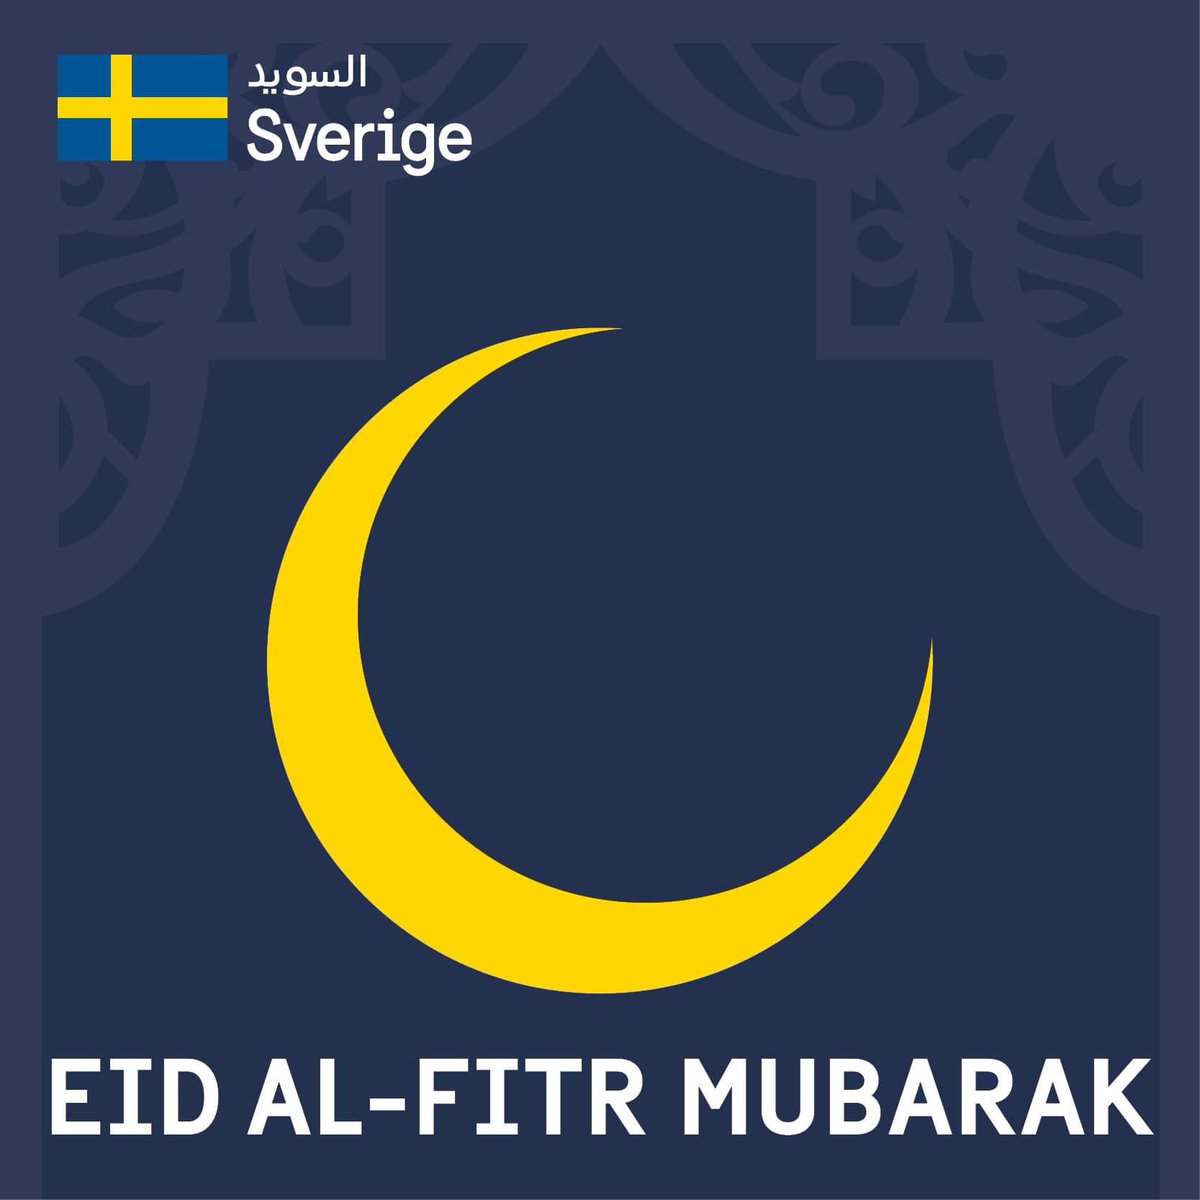 The Swedish Embassy in Amman wishes you and your family and blessed Eid Al-Fitr!